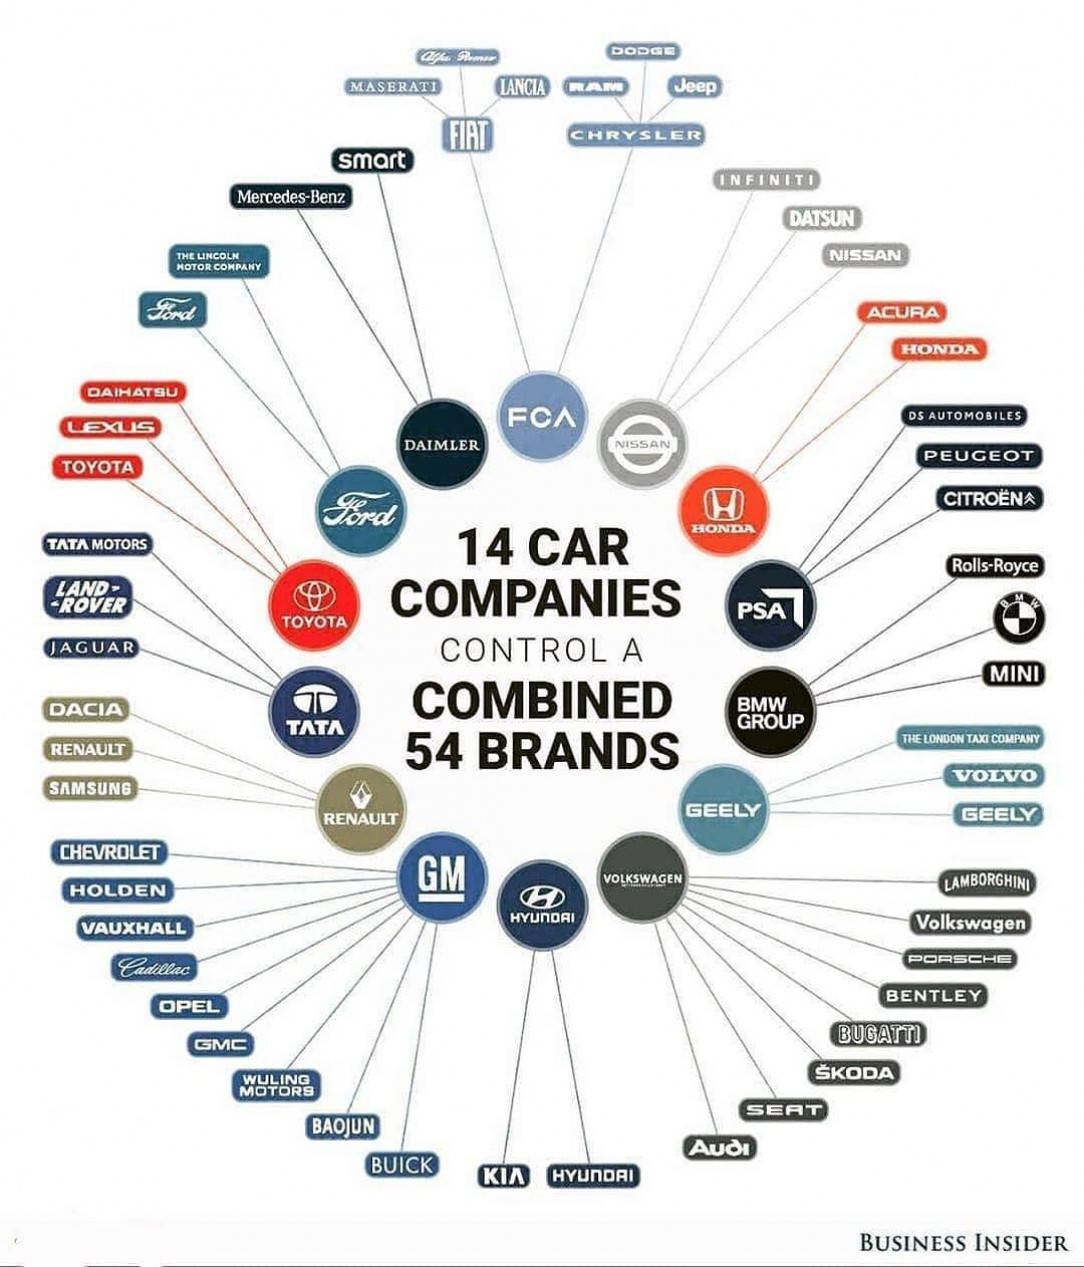 Only 14 Car companies control a total of 54 brands